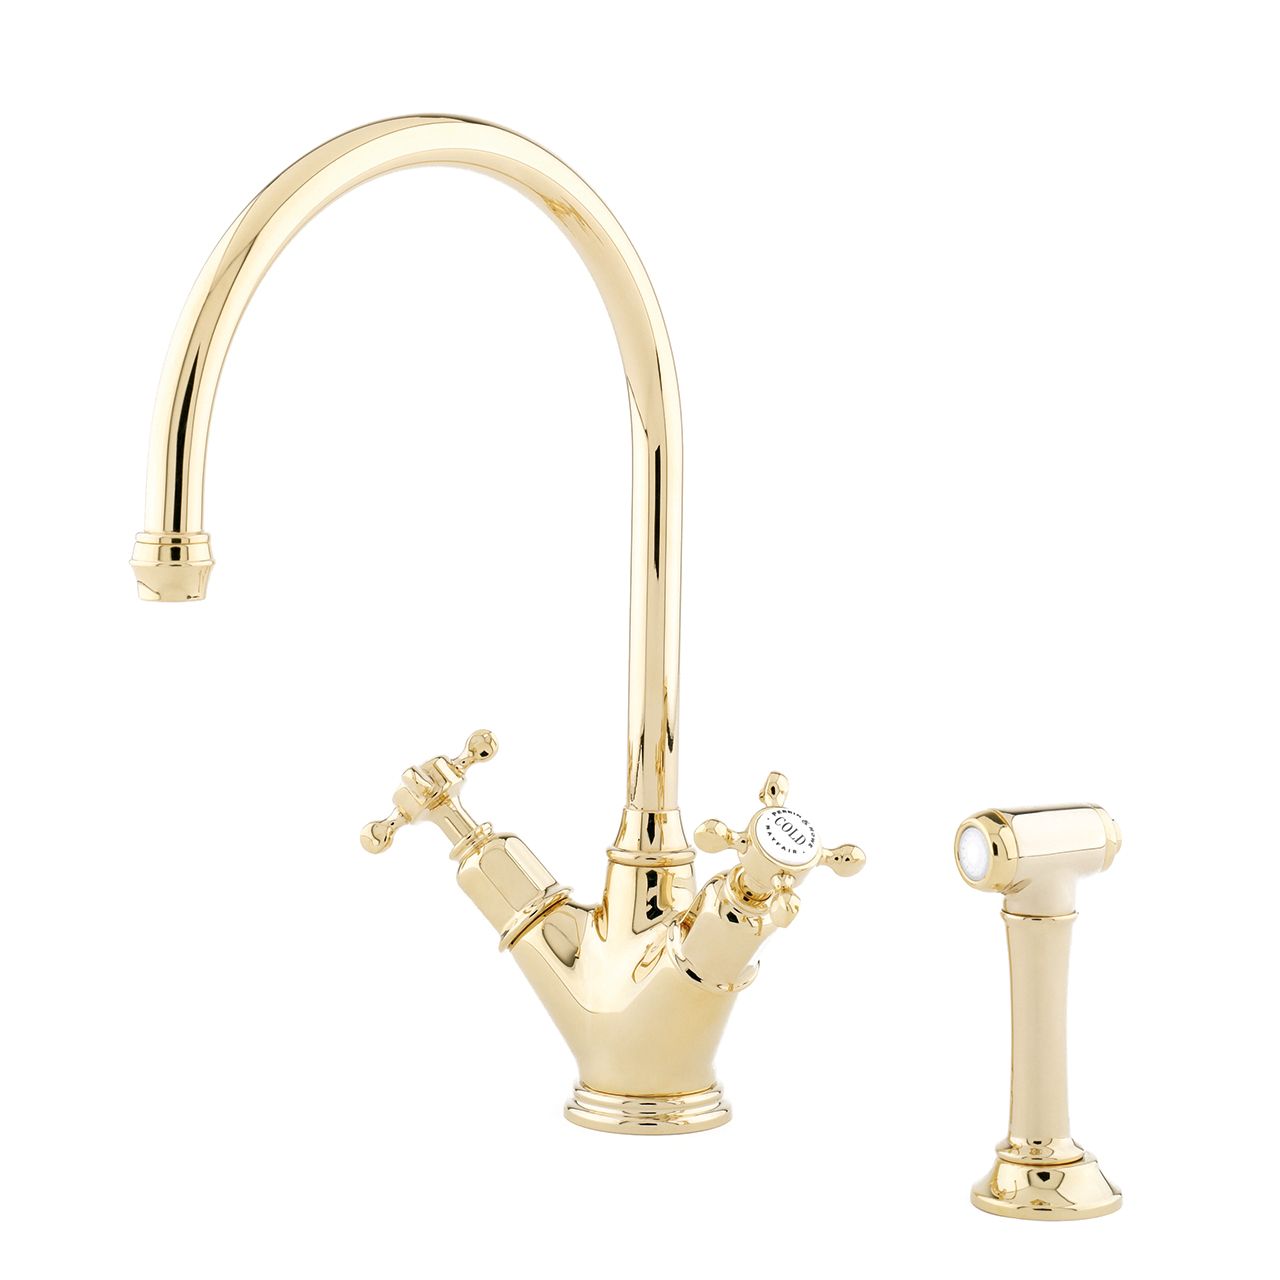 Phoenician Monobloc tap with C spout, Rinse Gold Finish with Cross Top Handles – Perrin & Rowe